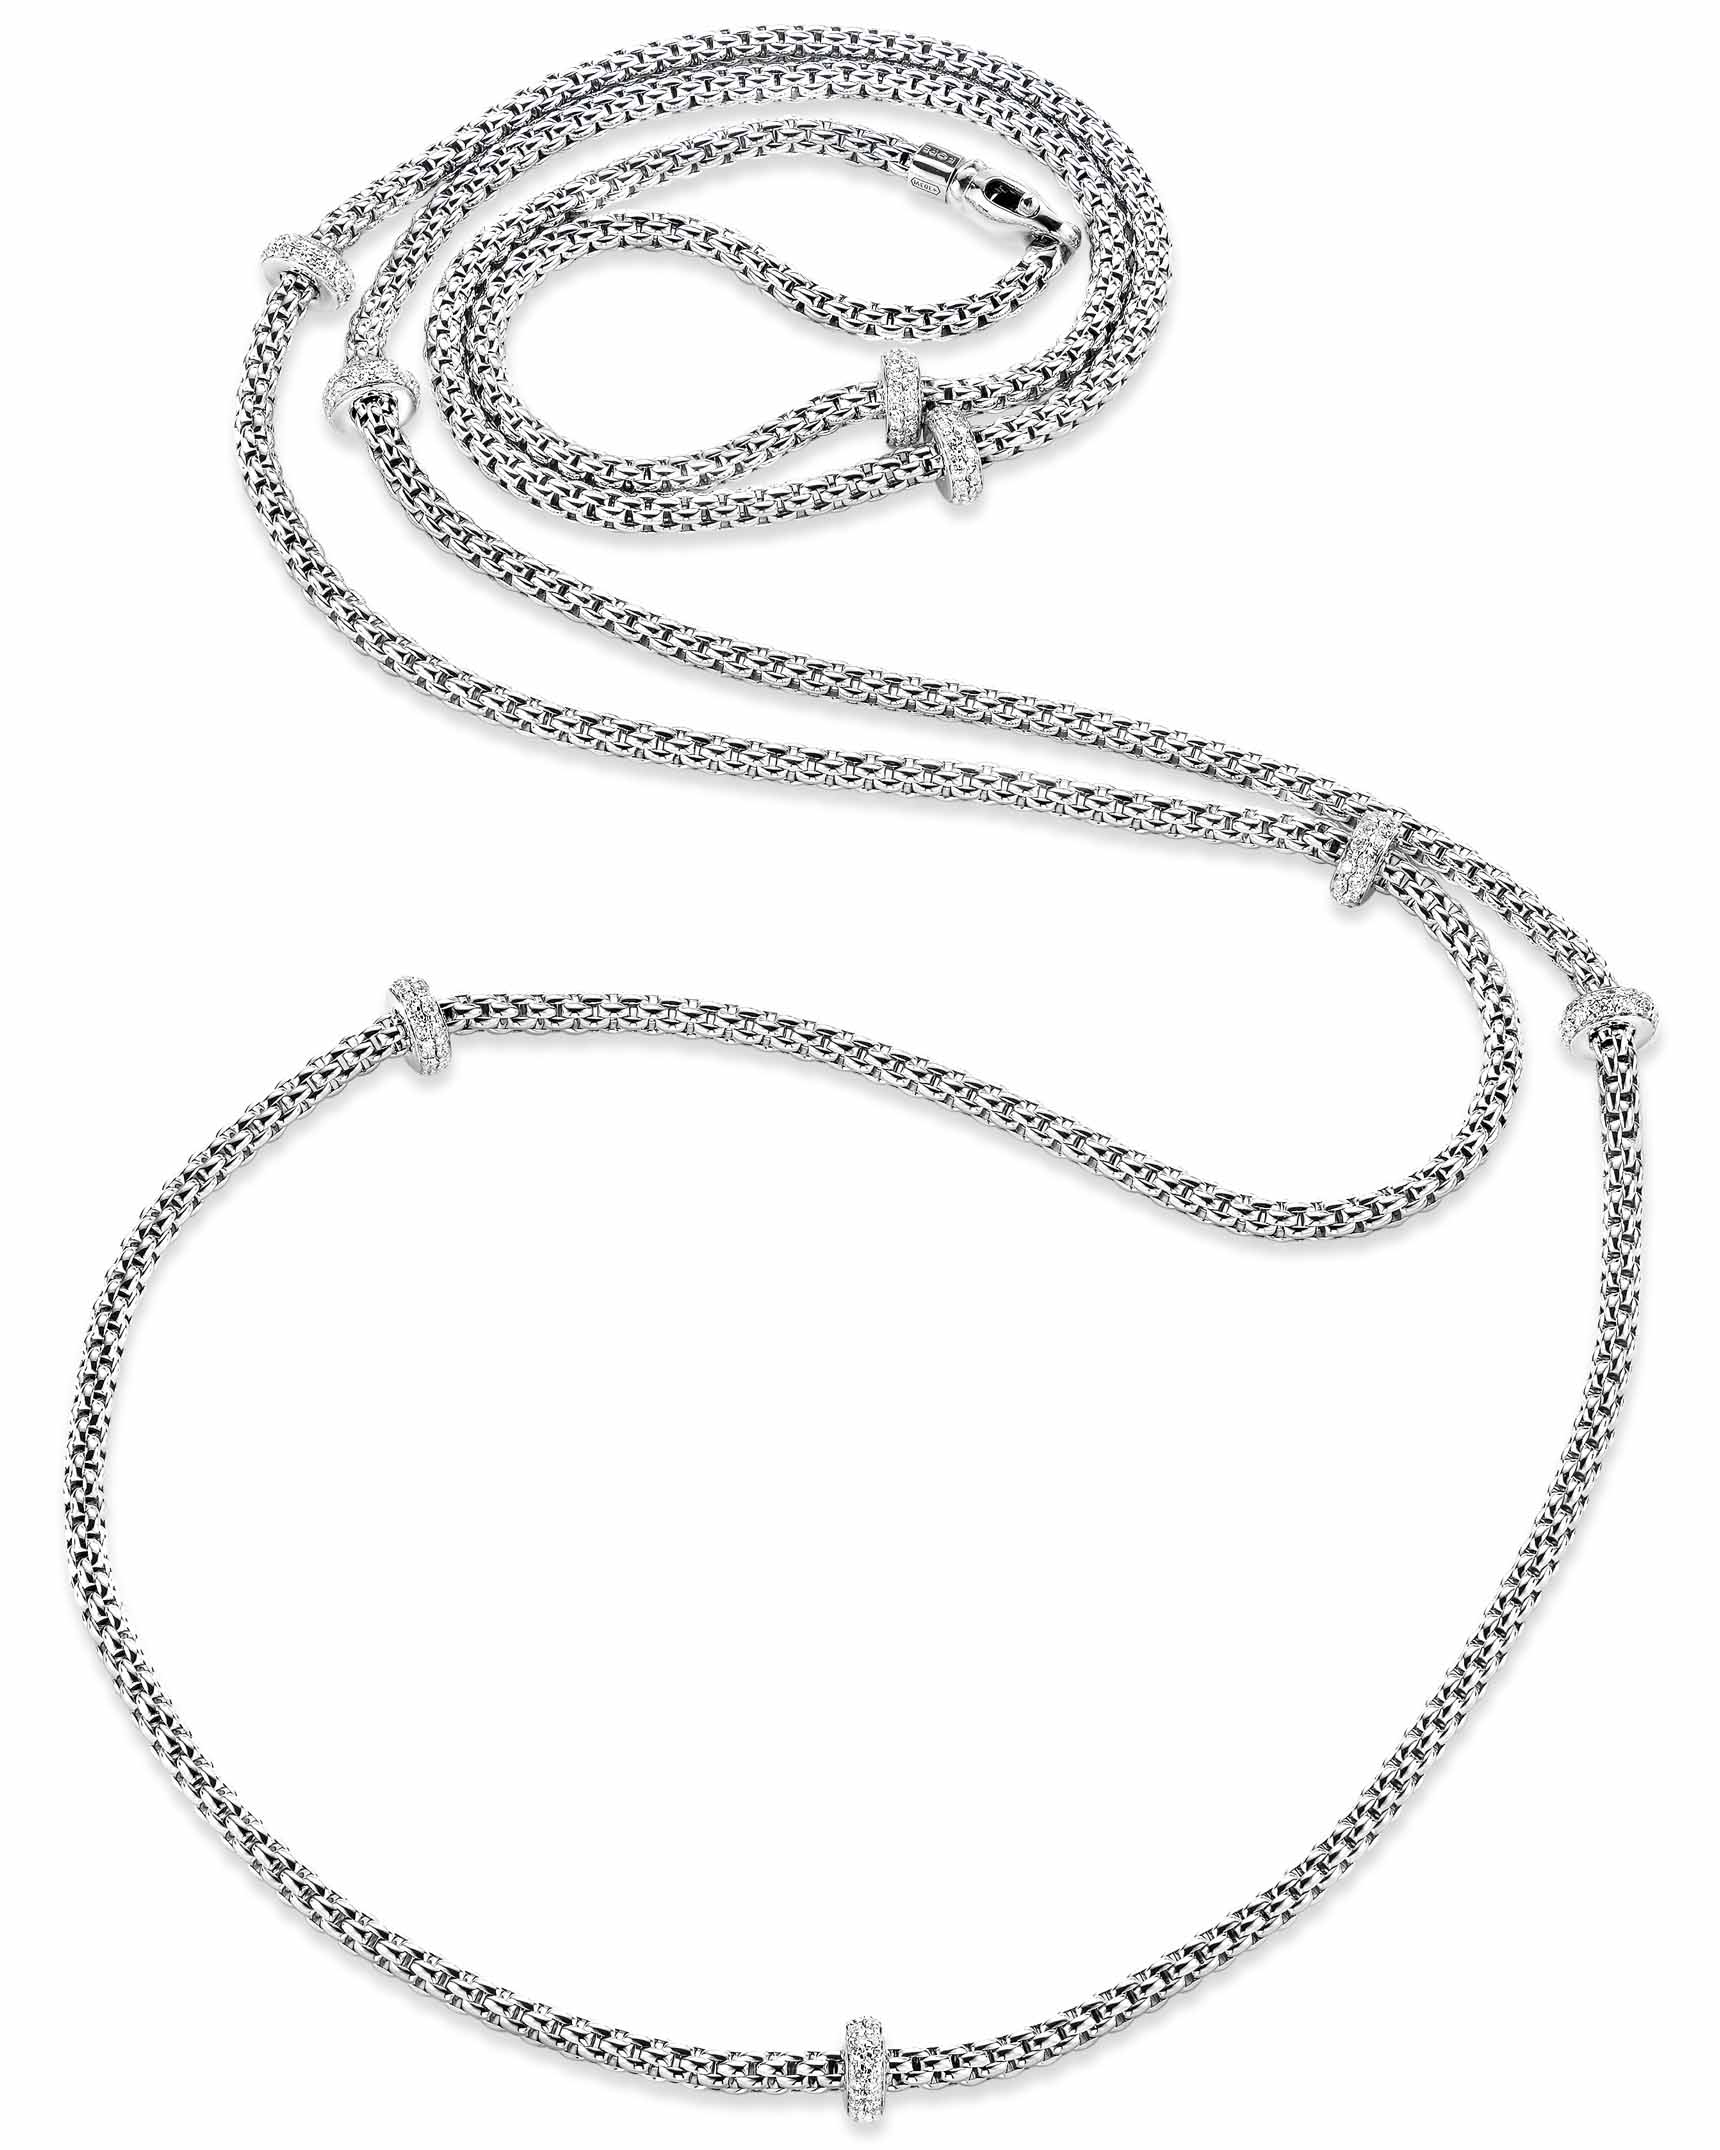 Lexington Chain Necklace in Sterling Silver with 18K Yellow Gold, 7mm |  David Yurman